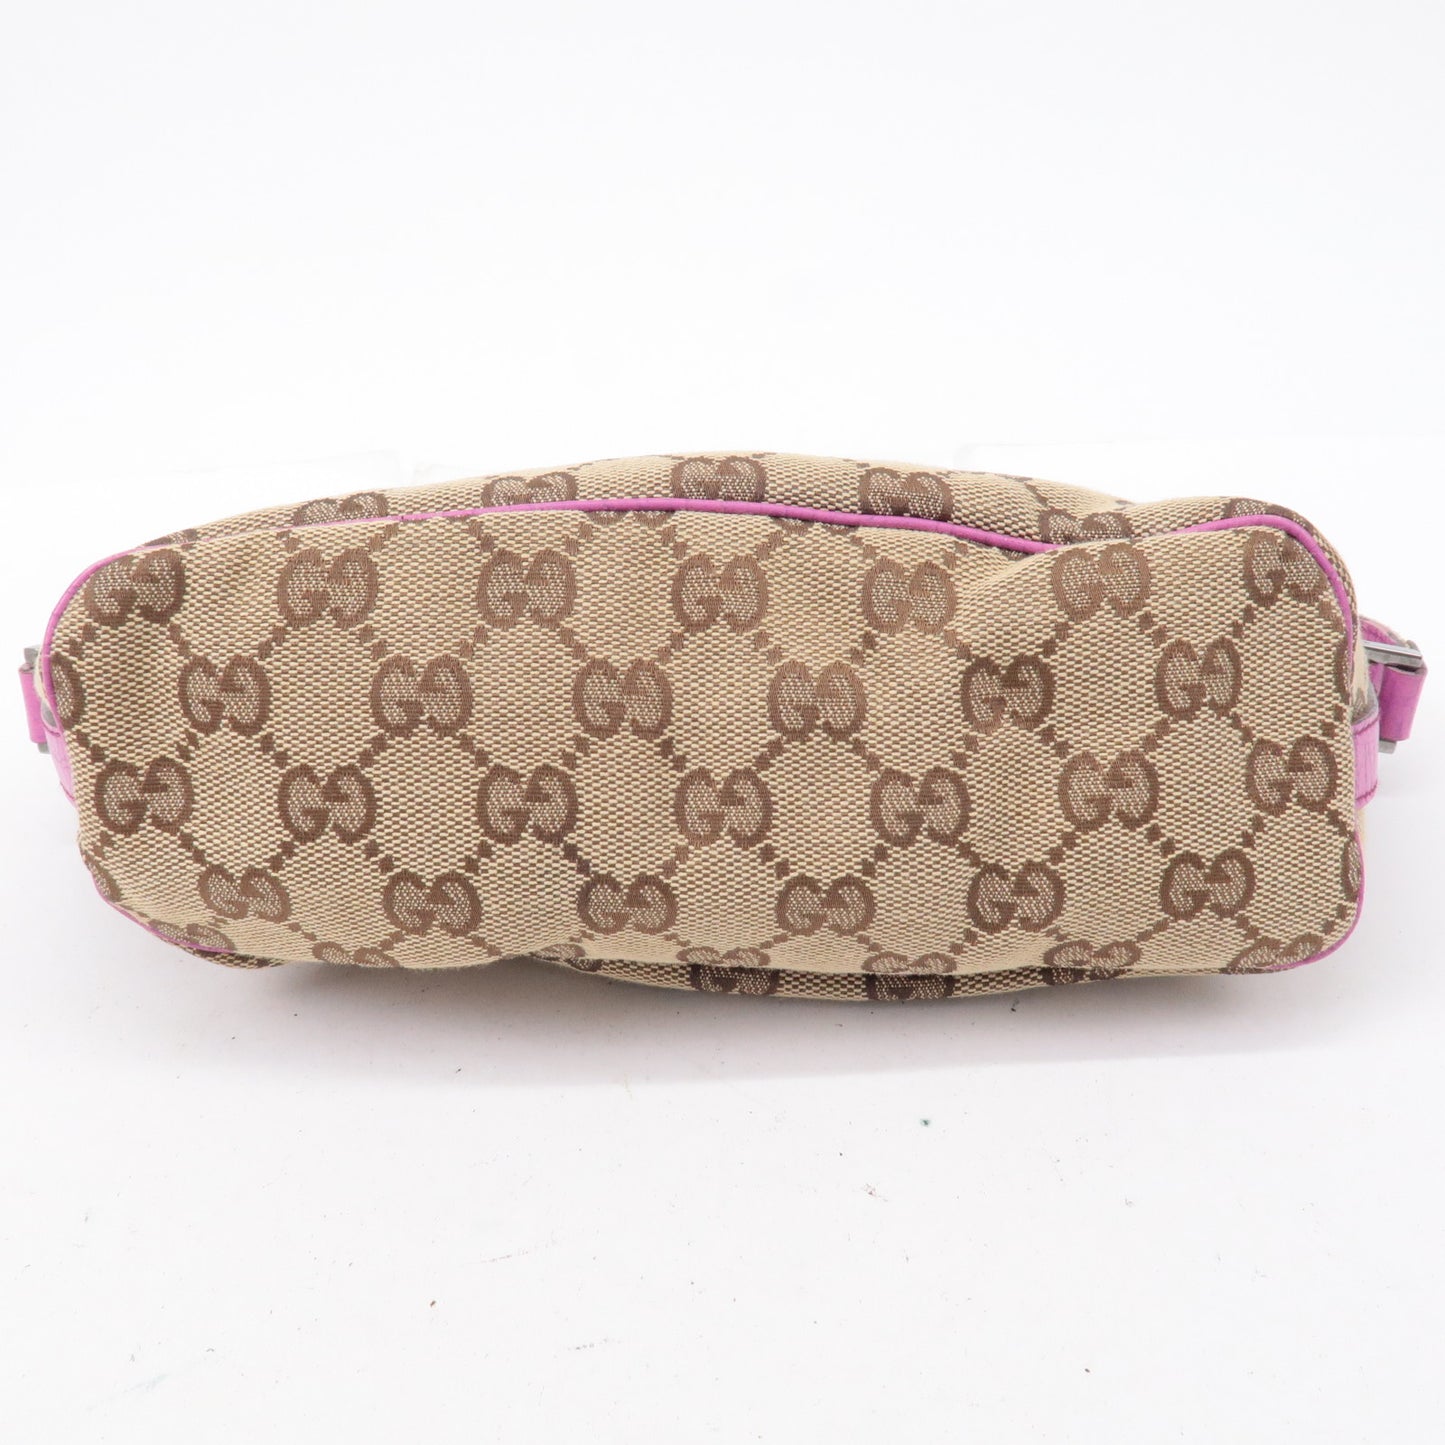 GUCCI Boat Bag GG Canvas Leather Pouch Beige Pink 141809